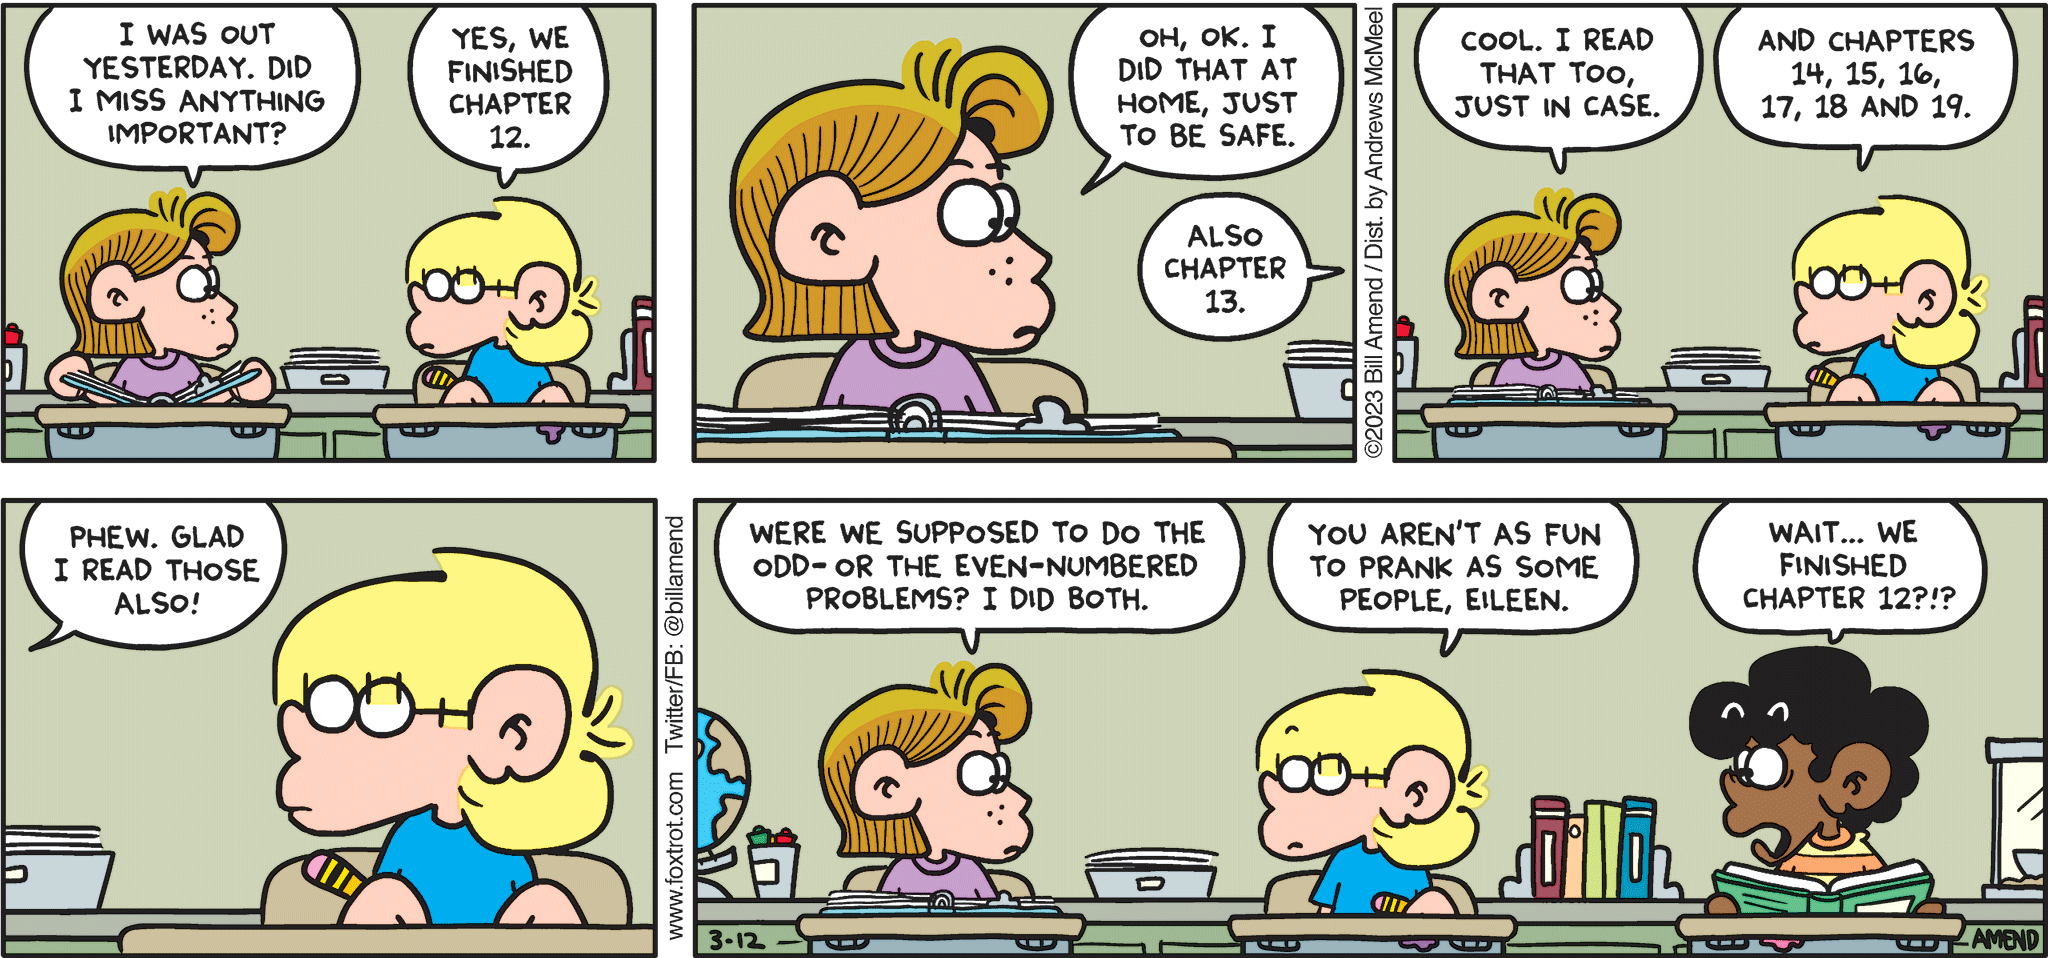 FoxTrot comic strip by Bill Amend - "Worrier Spirit" published March 12, 2023 - Transcript: Eileen Jacobson: I was out yesterday. Did I miss anything important? Jason Fox: Yes, we finished chapter 12. Eileen Jacobson: Oh, ok. I did that at home, just to be safe. Jason Fox: Also chapter 13. Eileen Jacobson: Cool. I read that too, just in case. Jason Fox: and chapters 14, 15, 16, 17, 18, and 19. Eileen Jacobson: Phew. Glad I read those also! Were we supposed to do the odd- or the even-numbered problems? I did both. Jason Fox: You aren't as fun to prank as some people, Eileen. Marcus: Wait... we finished chapter 12?